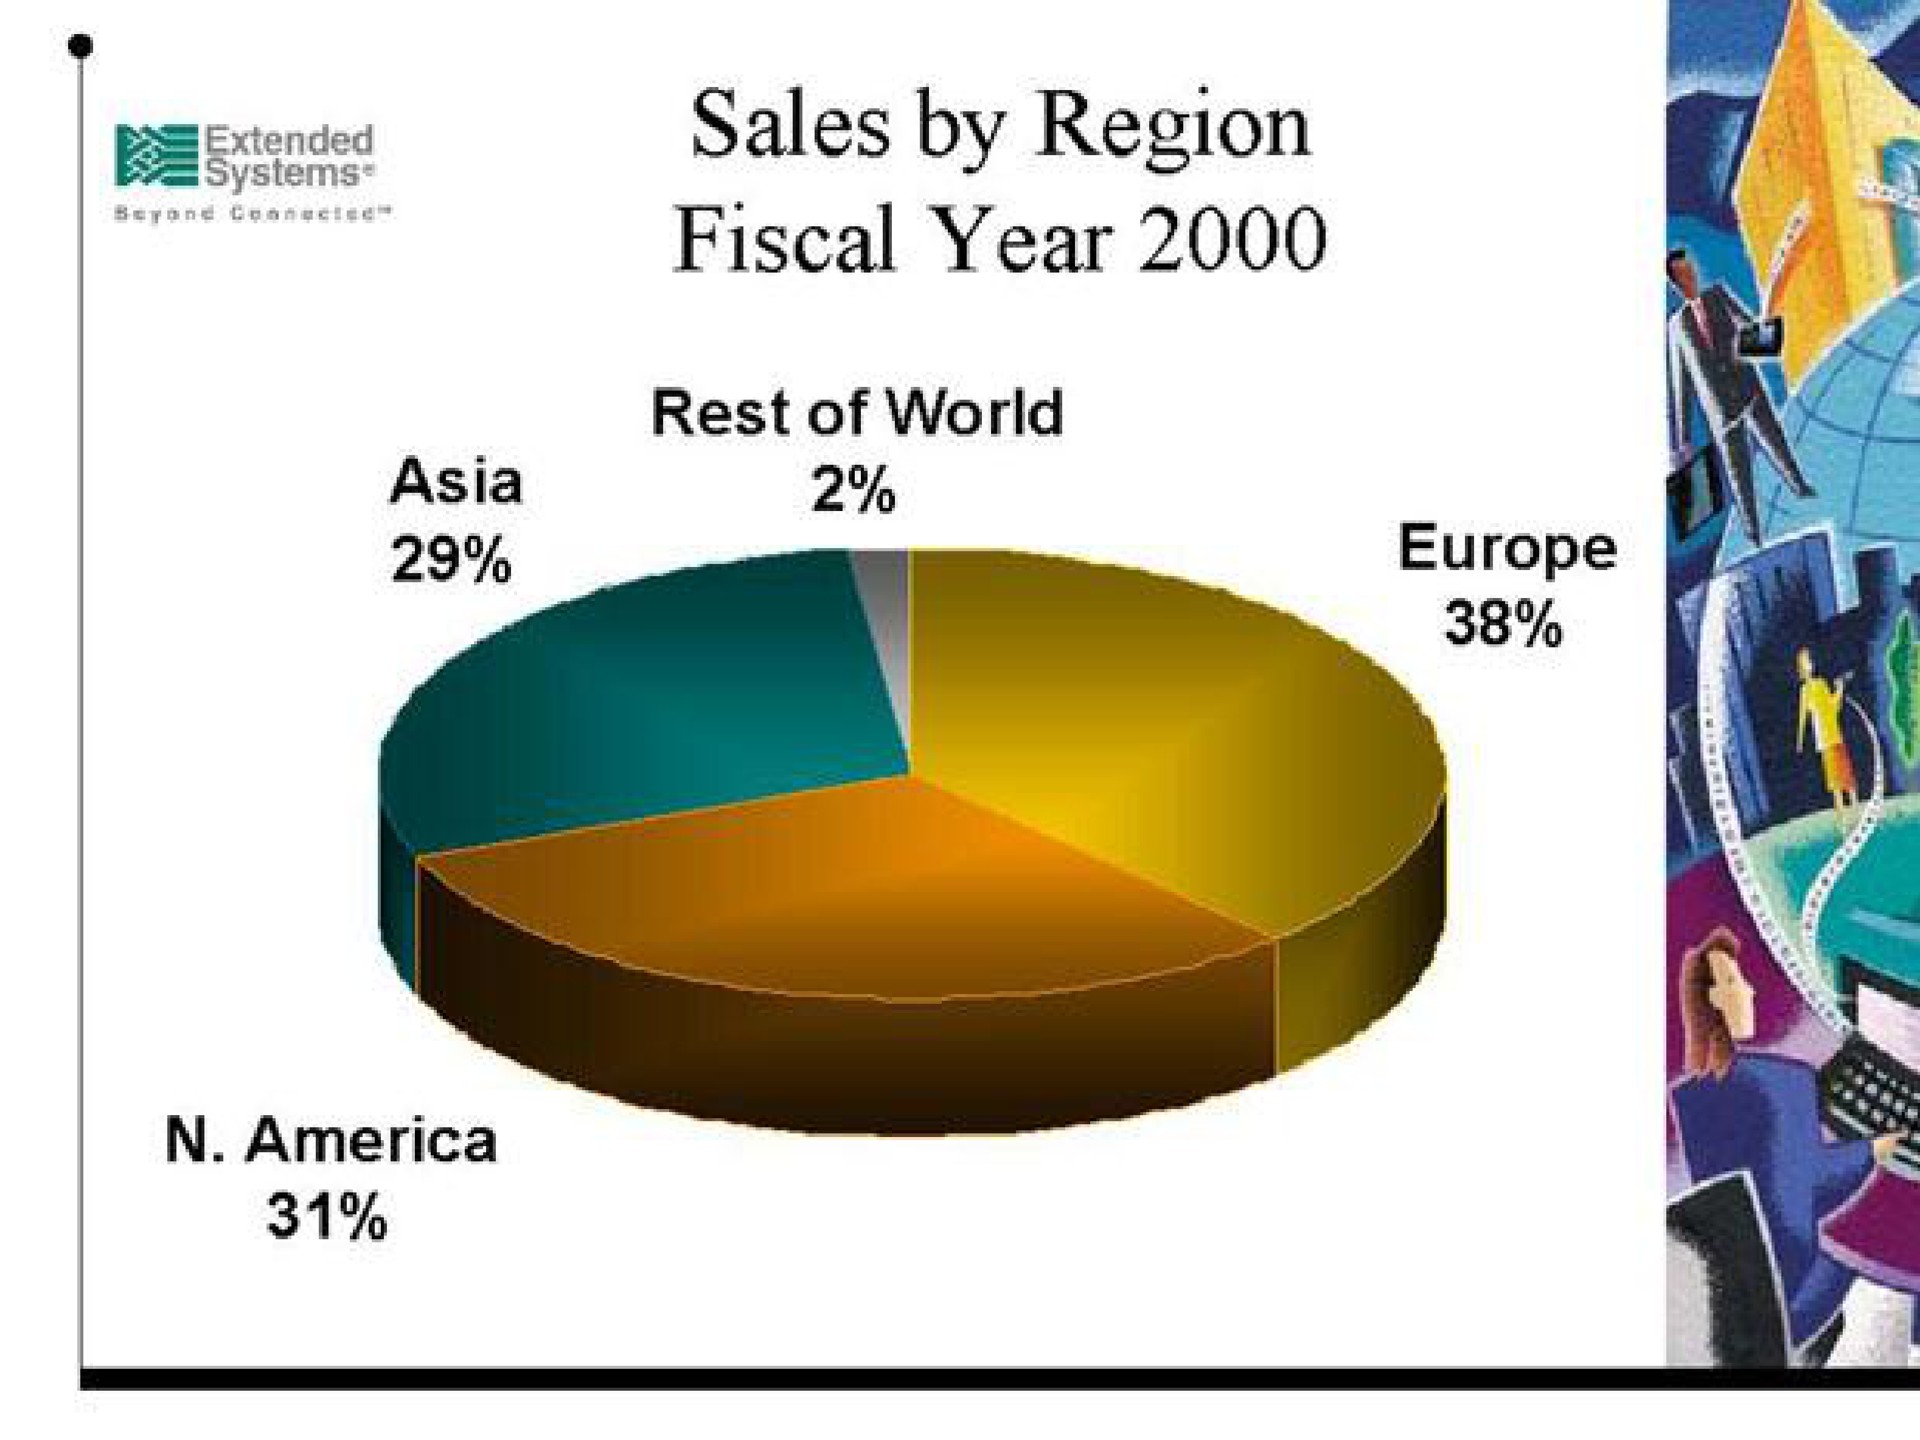 extended sales by region fiscal year | Extended Systems